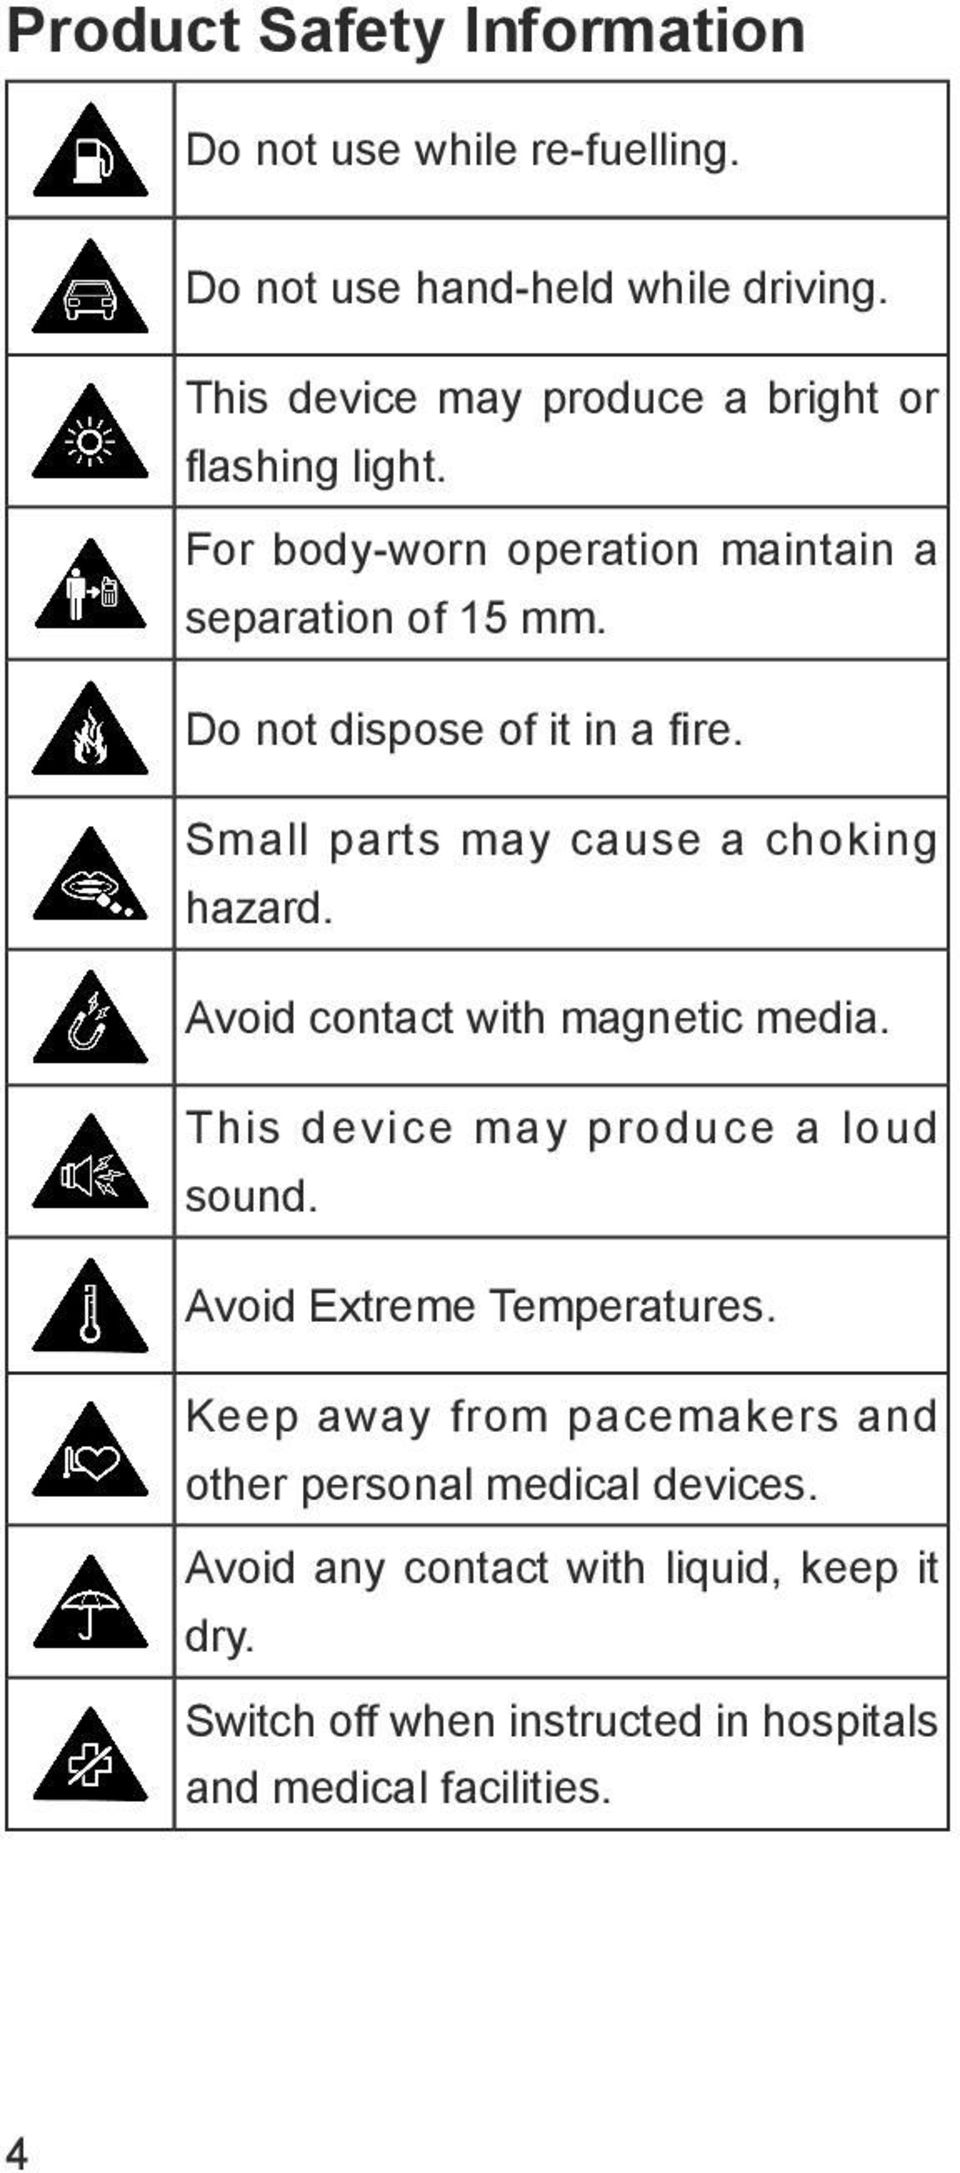 Do not dispose of it in a fire. Small parts may cause a choking hazard. Avoid contact with magnetic media.